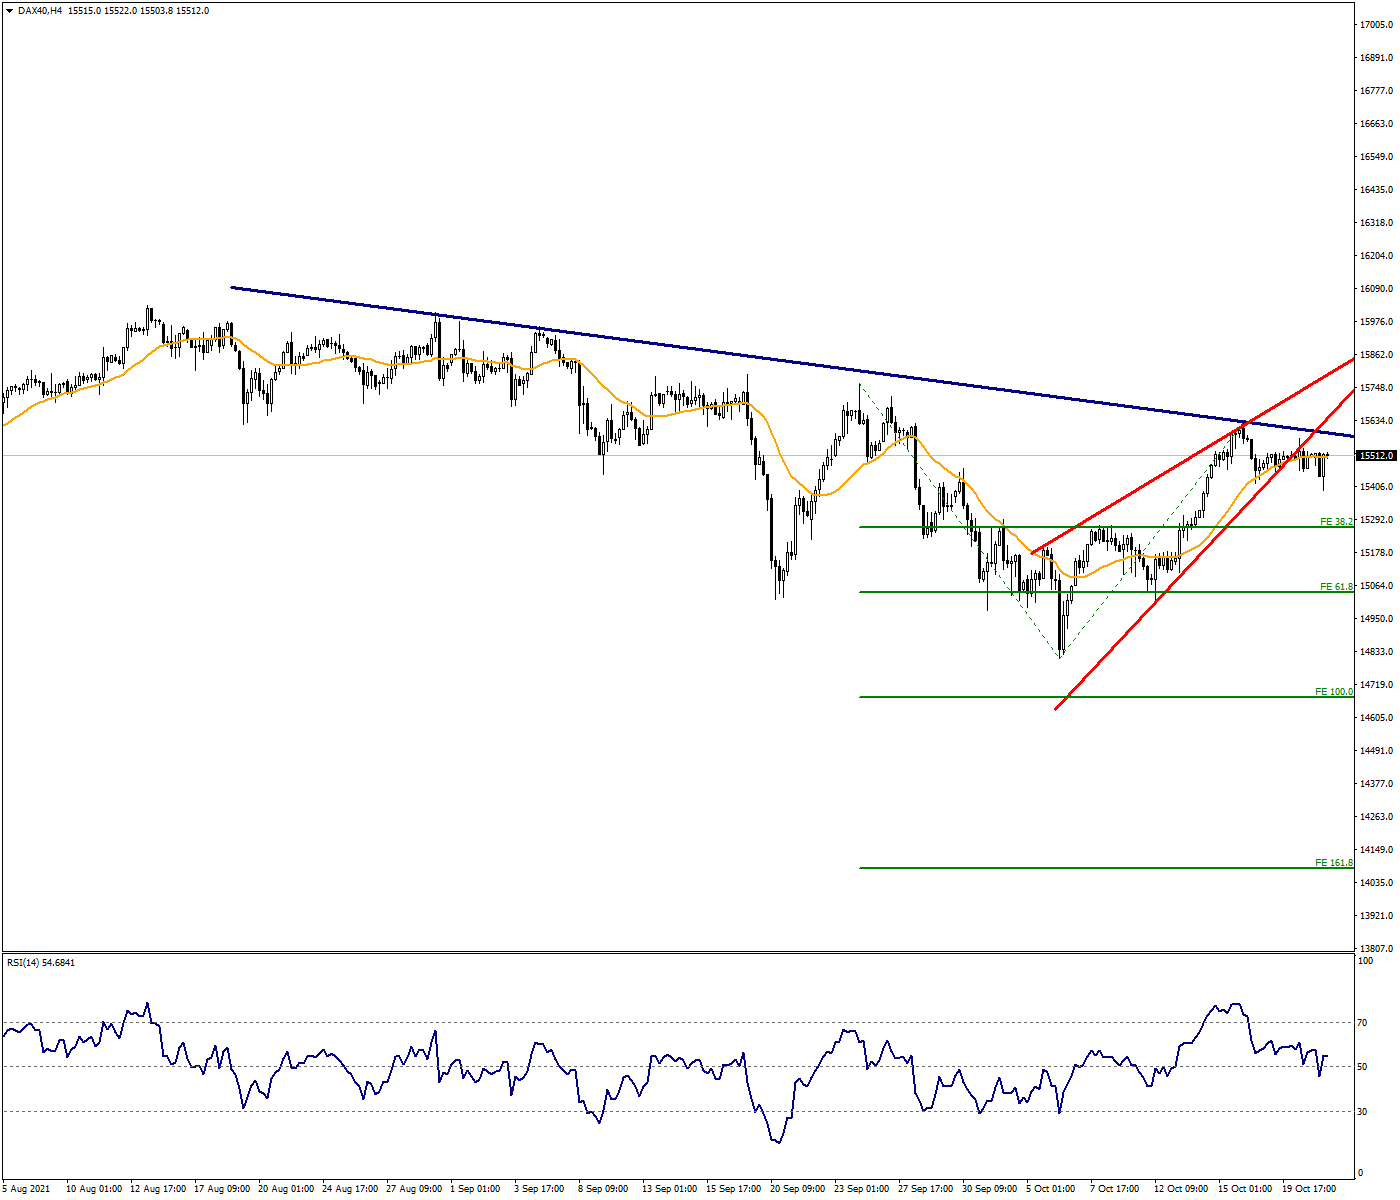 DAX40 could further decline